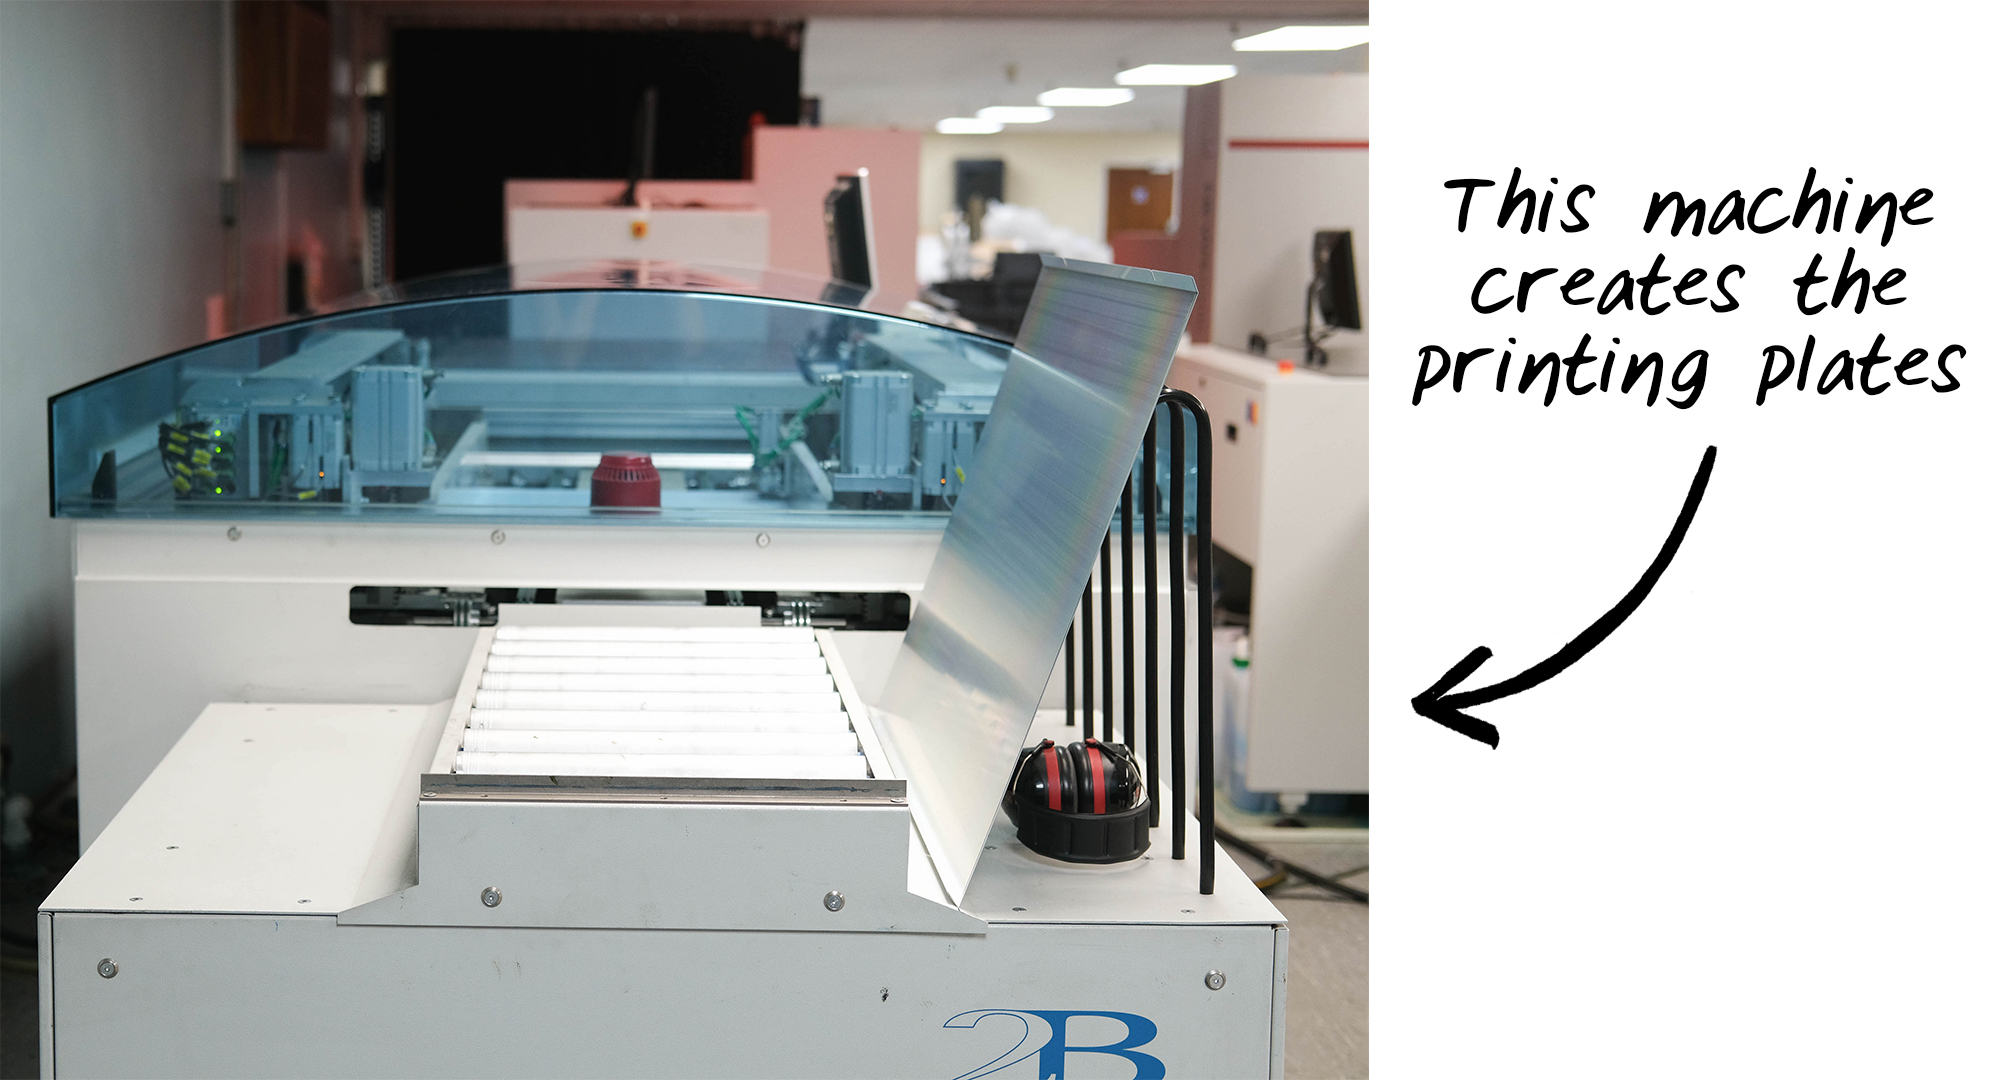 Metal plates are produced to print a newspaper.